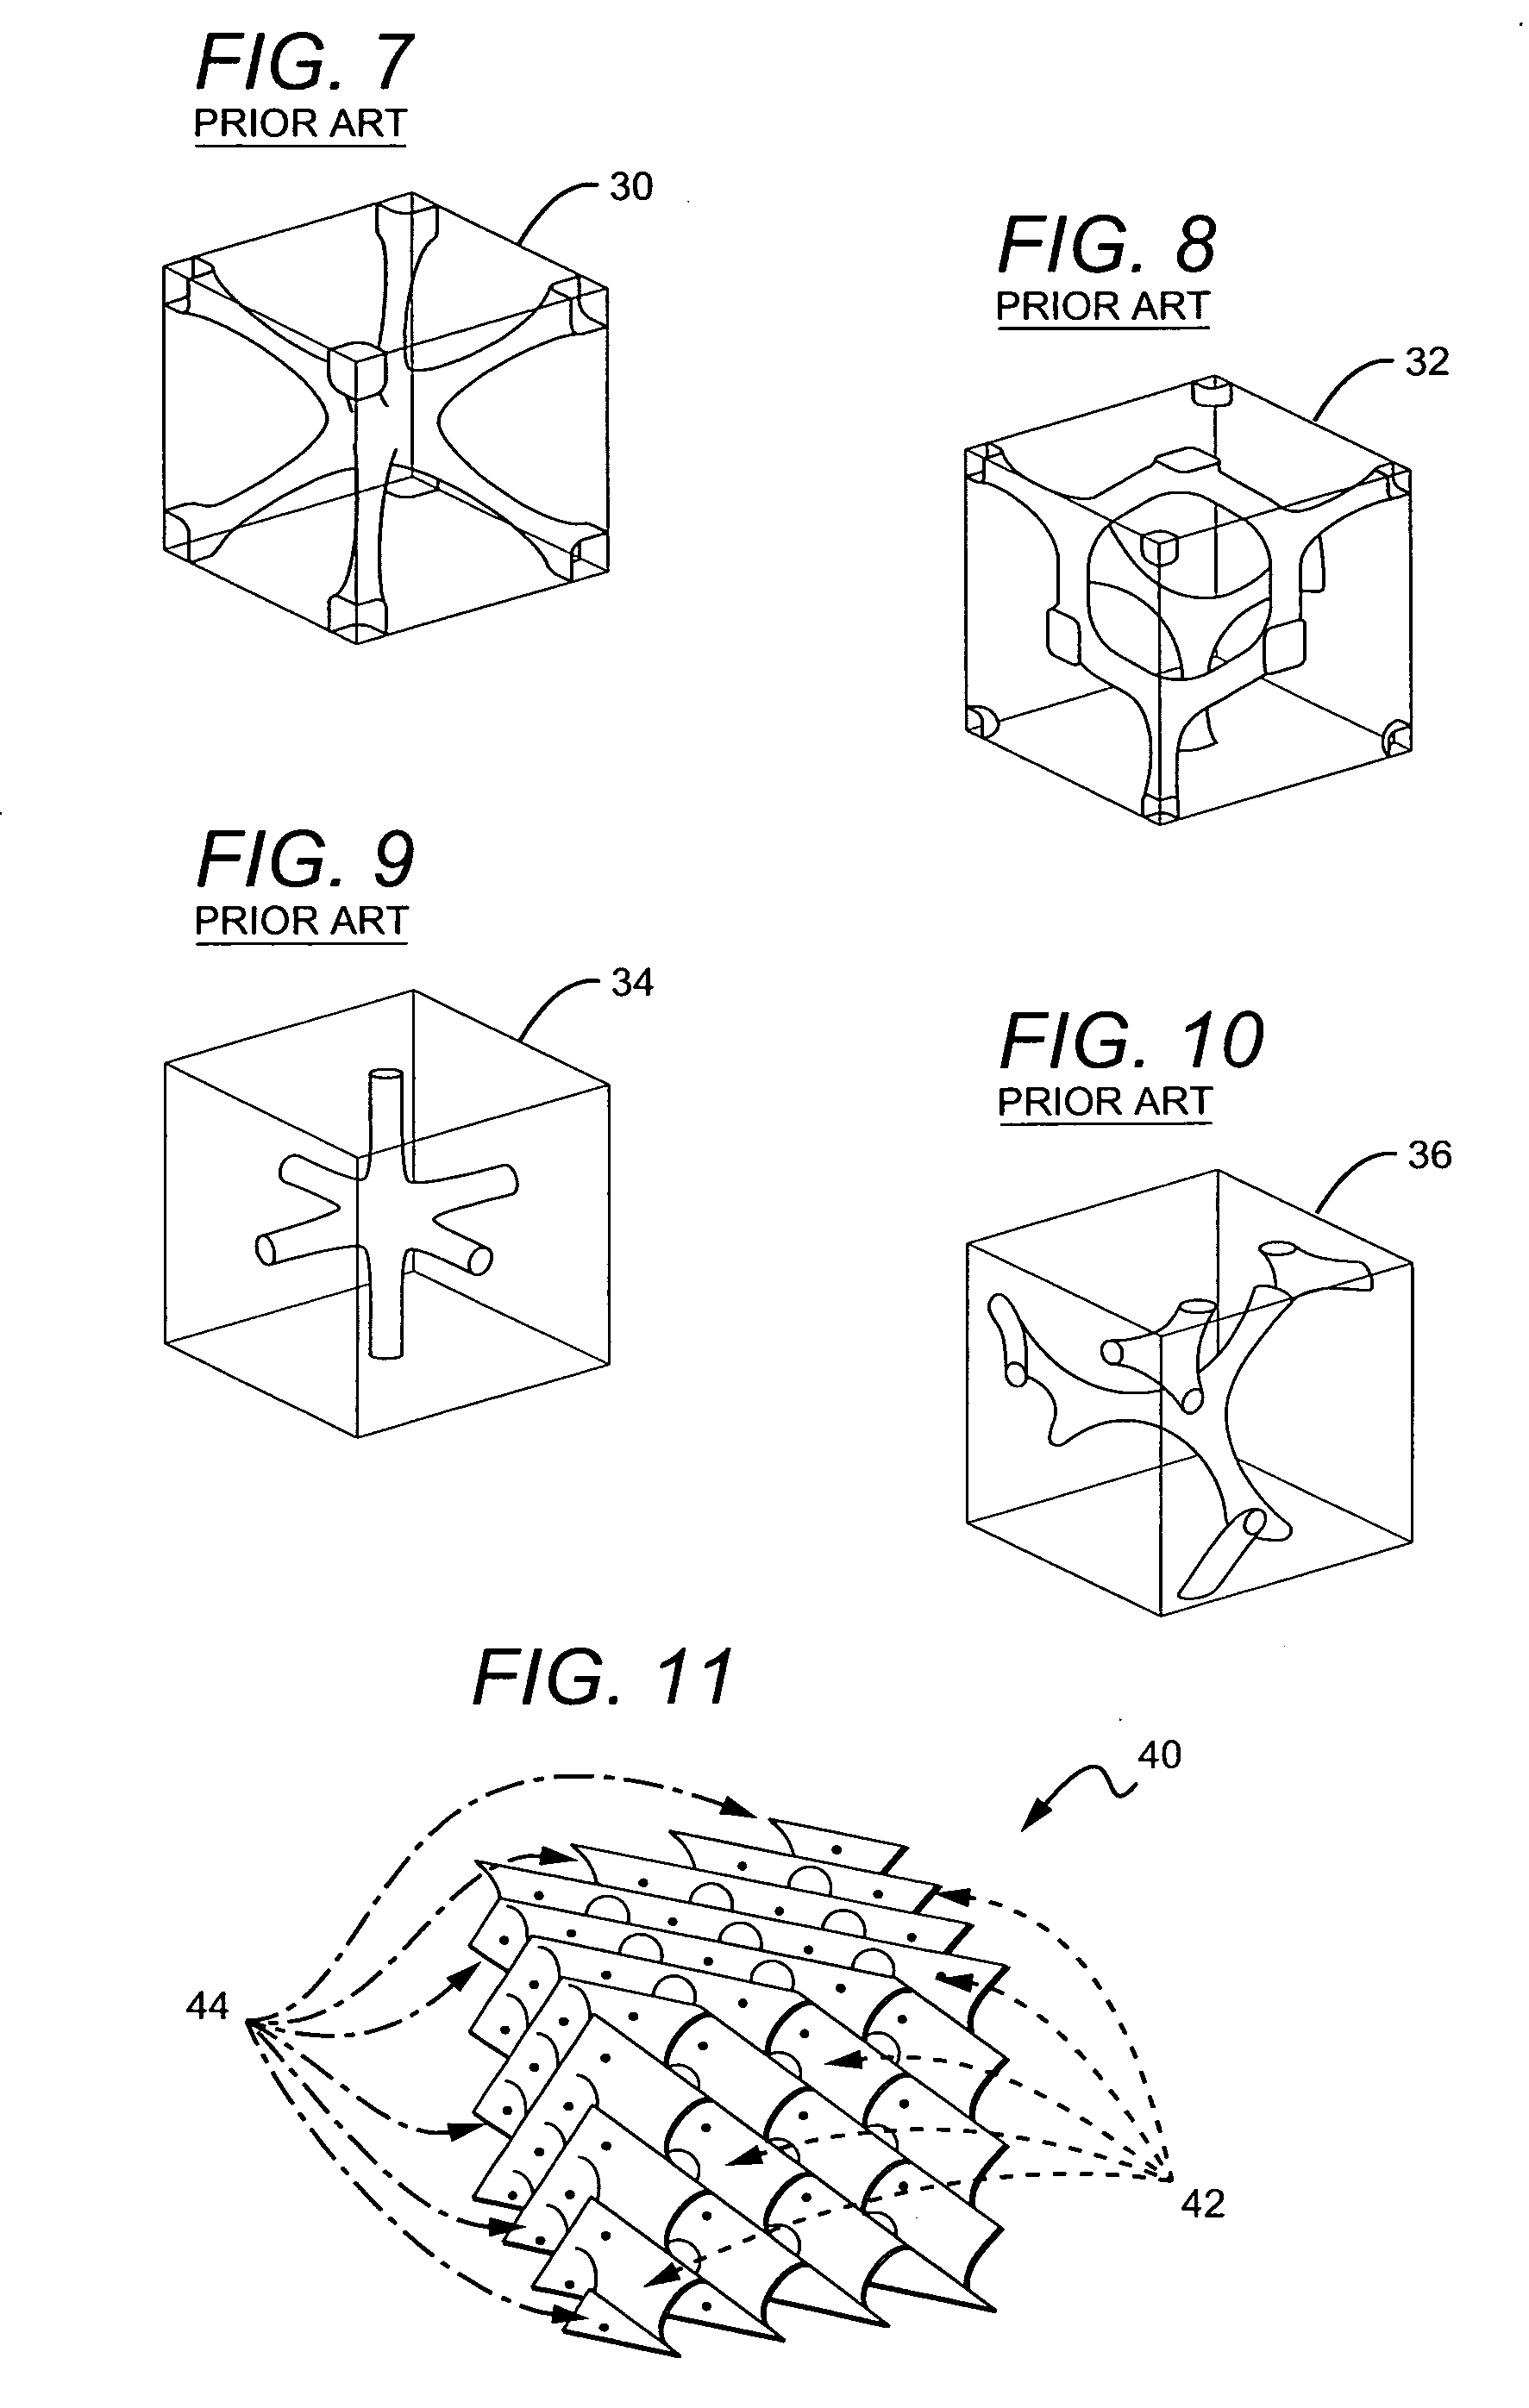 Method of using minimal surfaces and minimal skeletons to make heat exchanger components